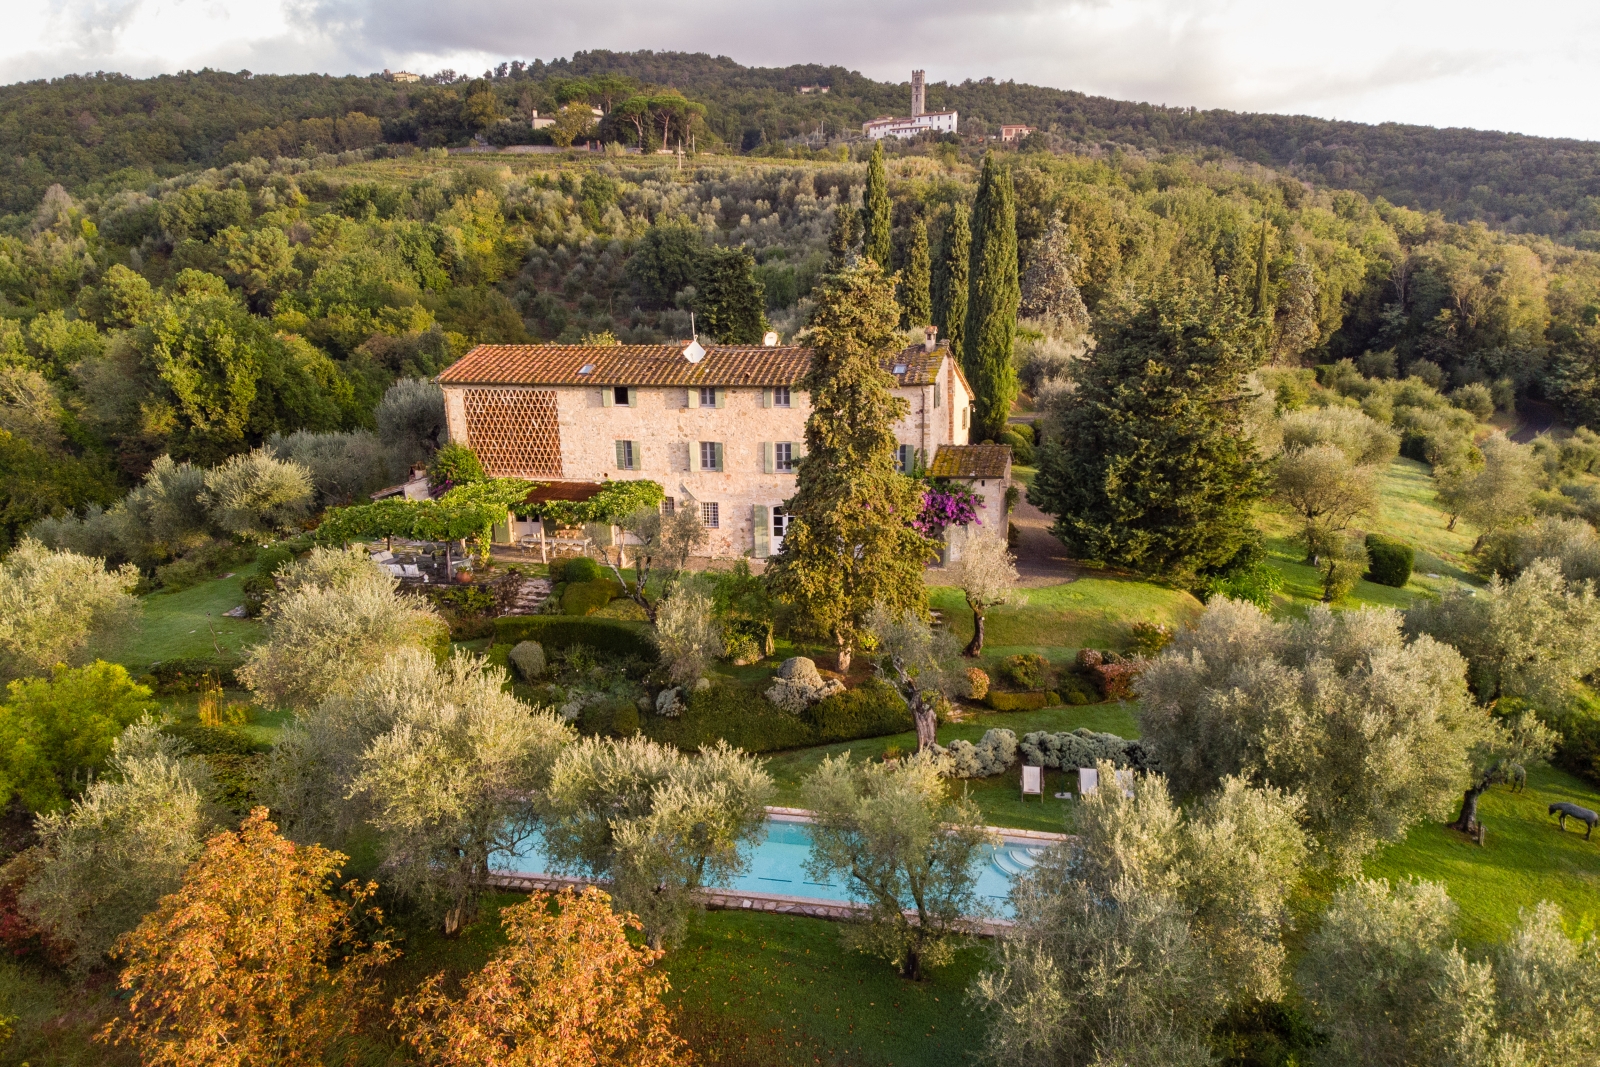 Aerial view of Villa Ortensia and its grounds in Tuscany Italy